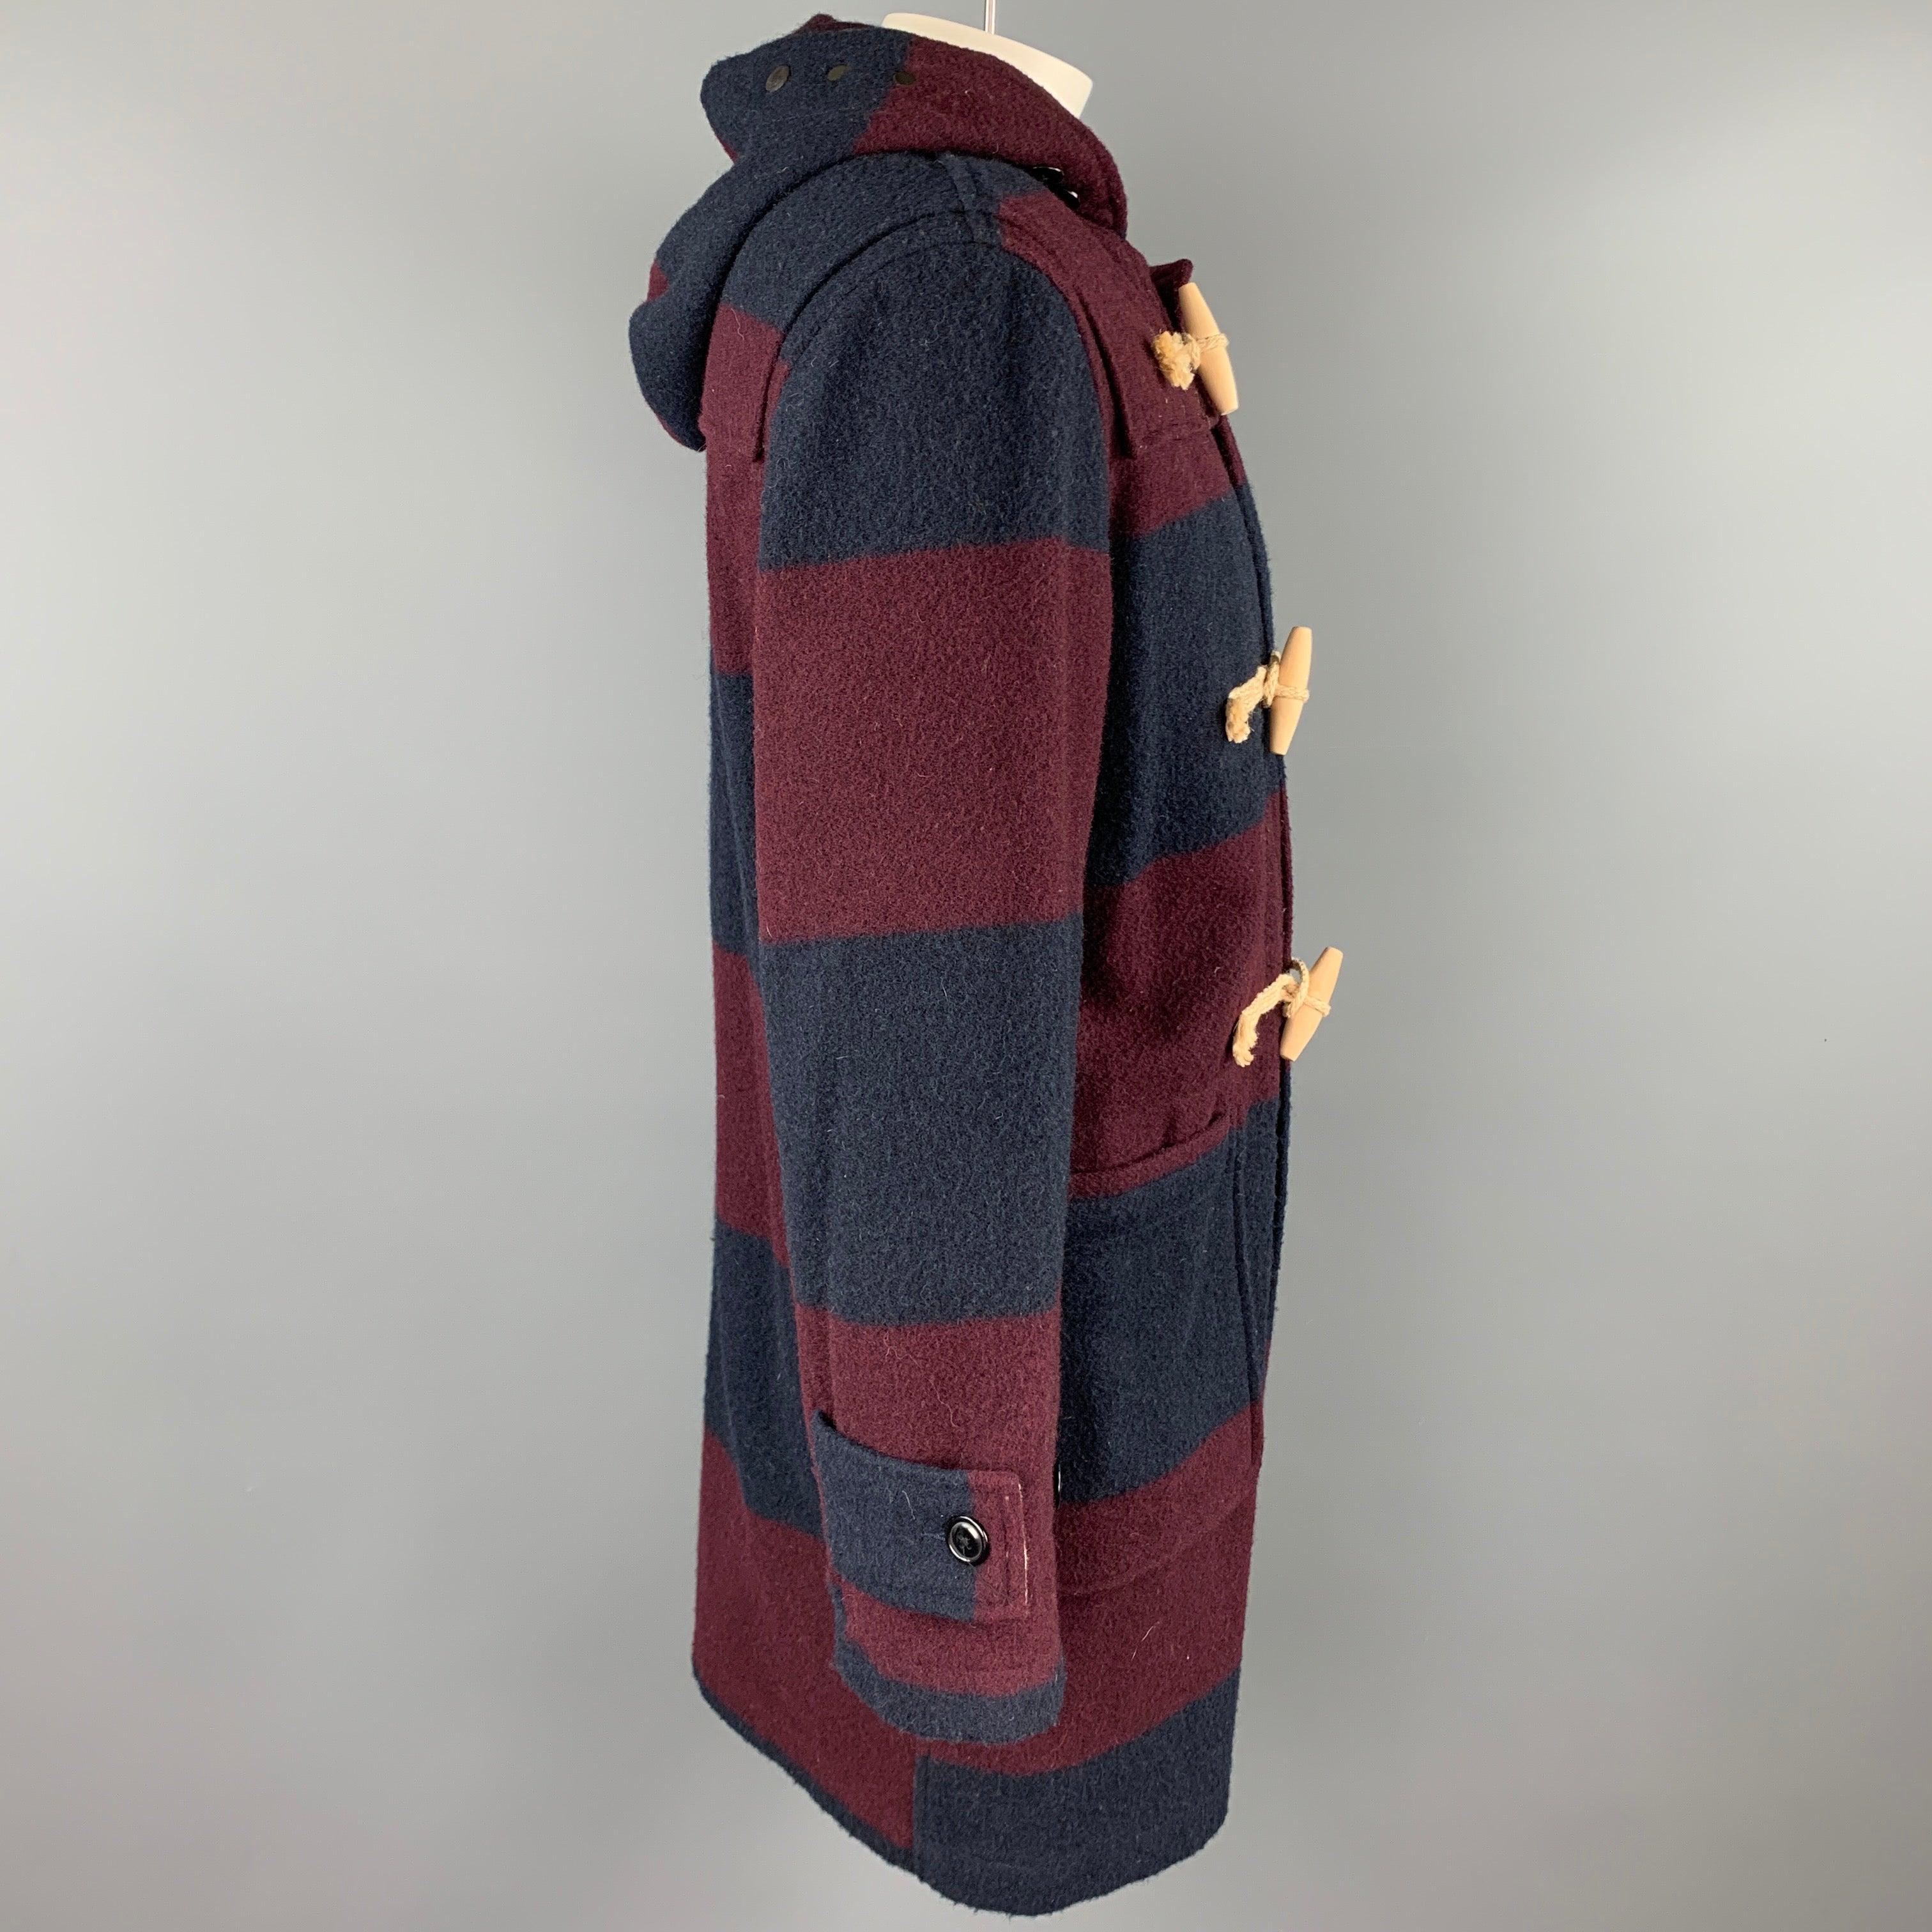 WOOLRICH Size M Burgundy & Navy Stripe Wool / Nylon Hooded Coat In Good Condition For Sale In San Francisco, CA